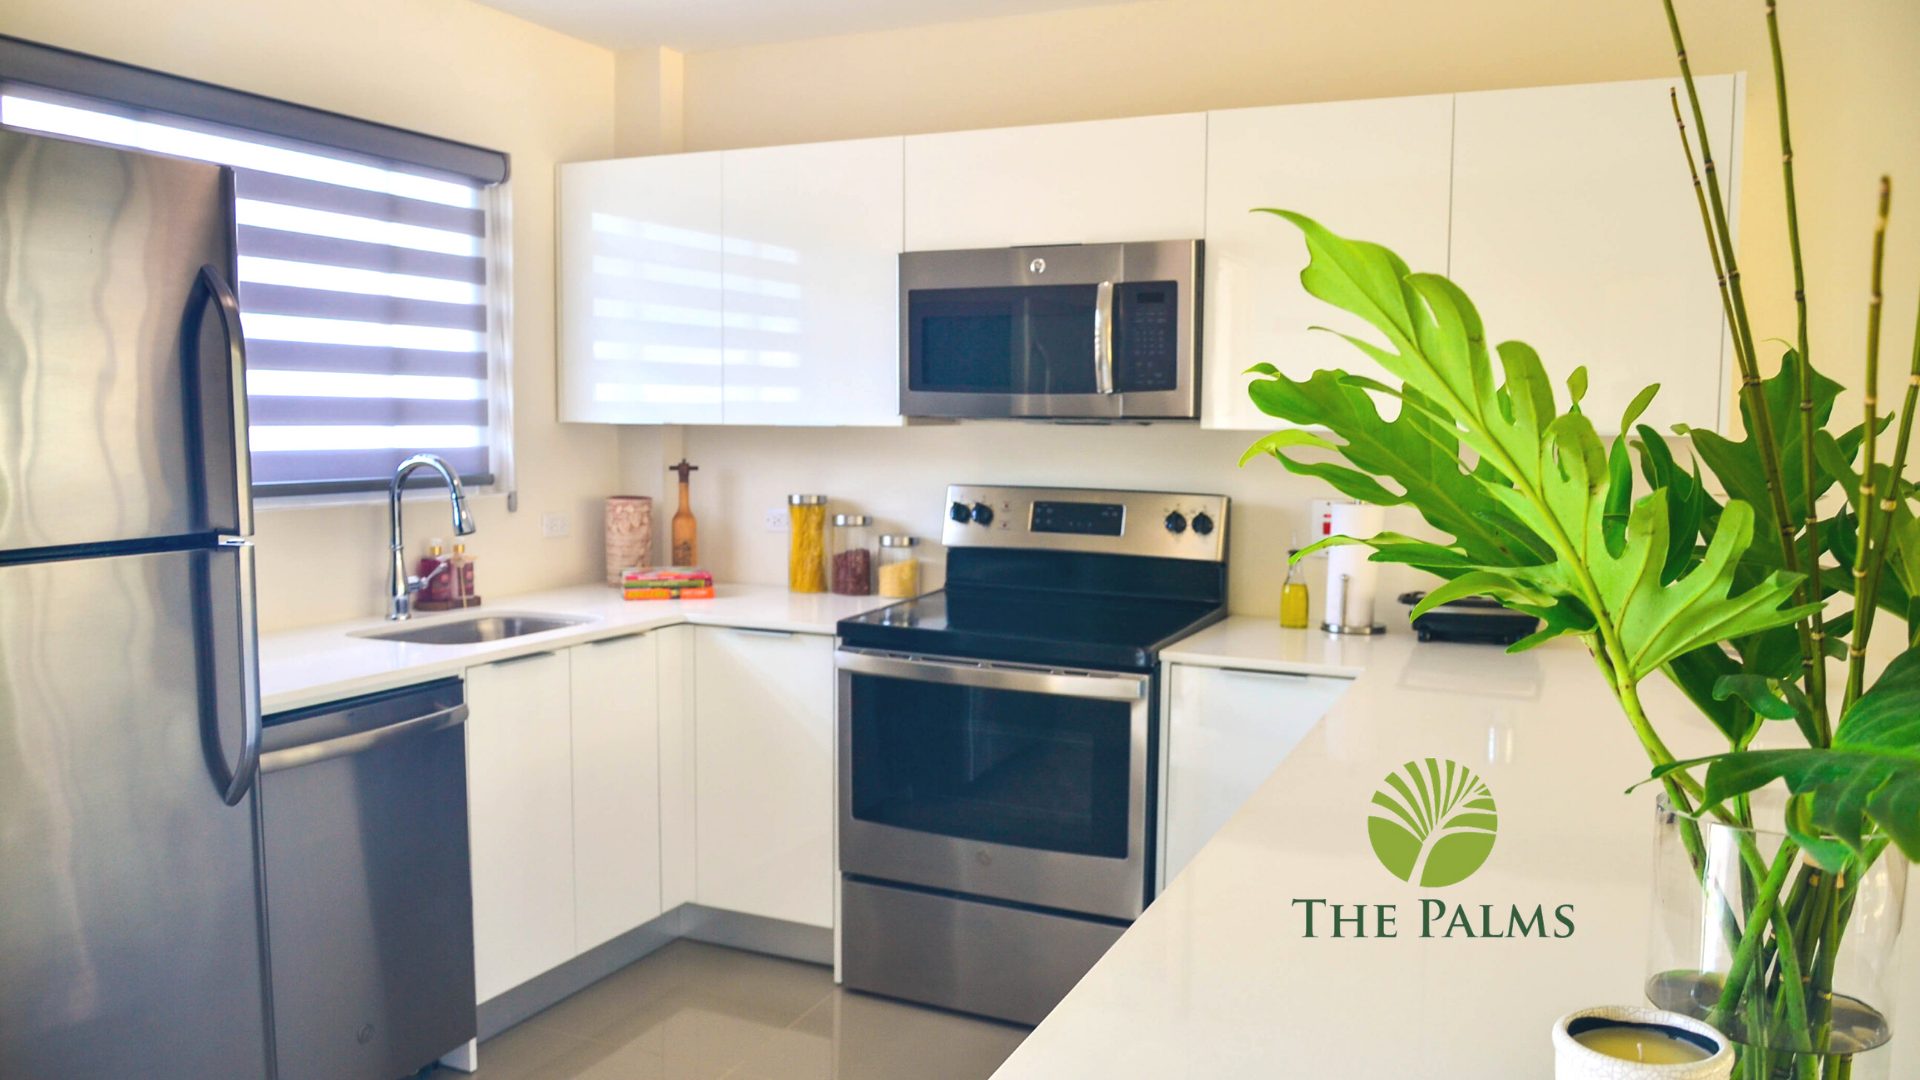 Townhouses for Sale The Palms Trinidad - kitchen area